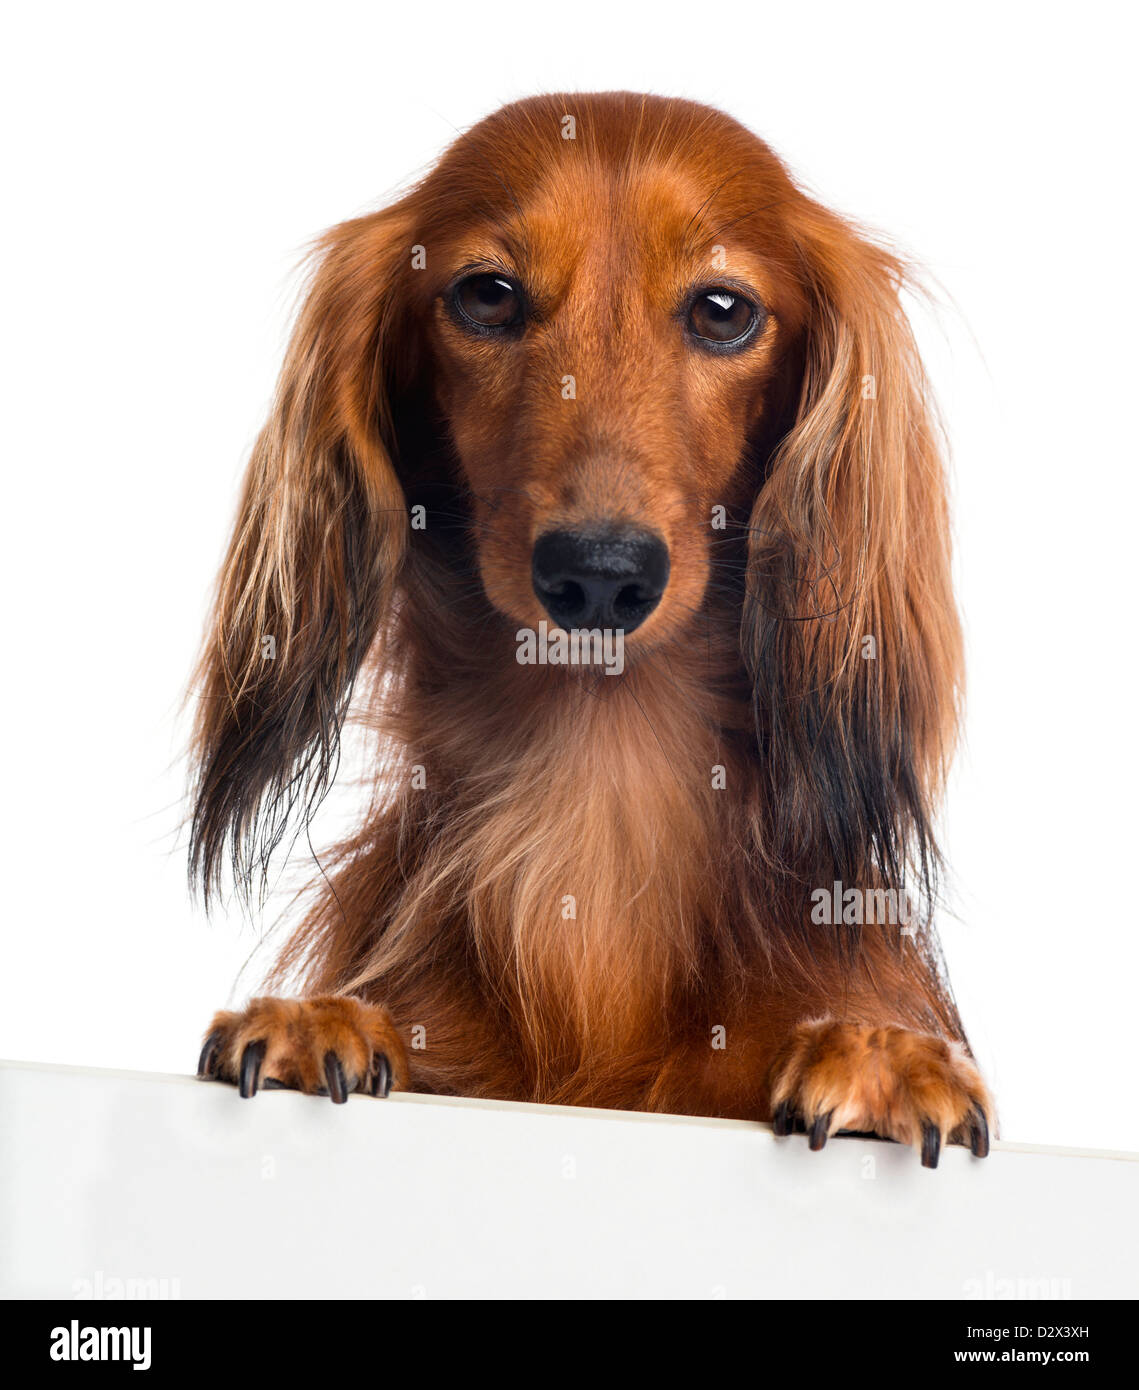 Dachshund, 4 years old, against white background Stock Photo